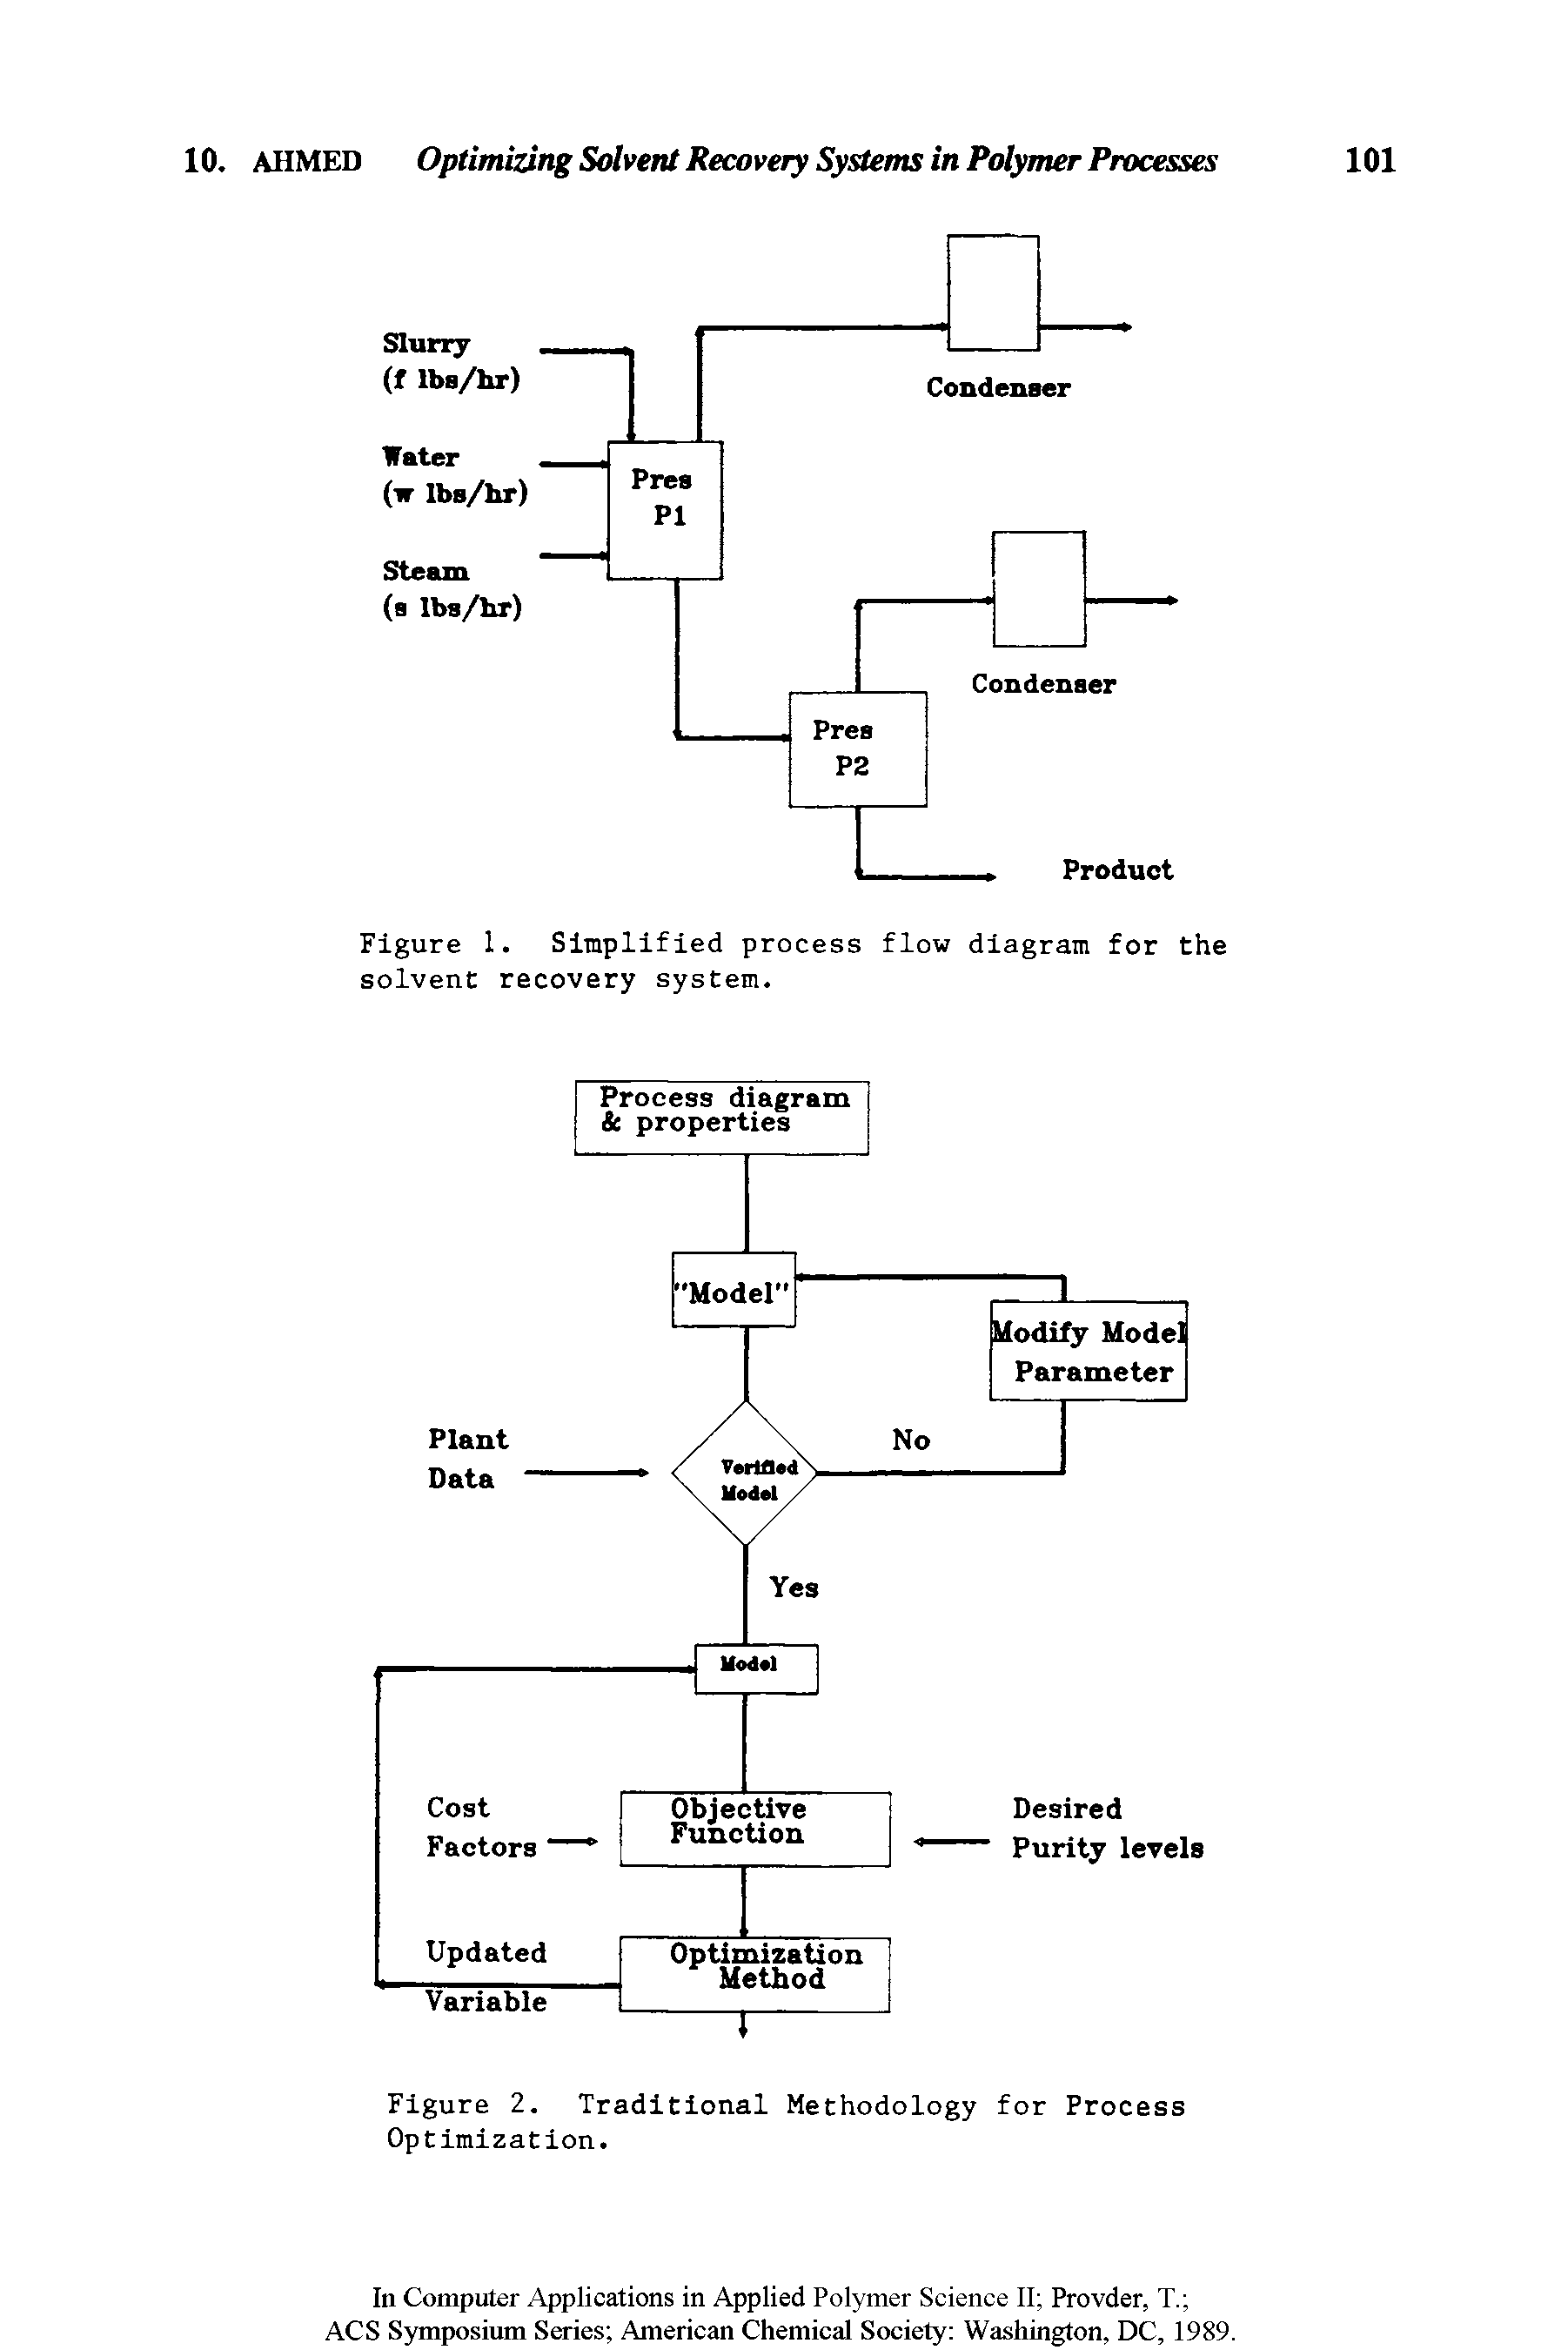 Figure 1. Simplified process flow diagram for the solvent recovery system.